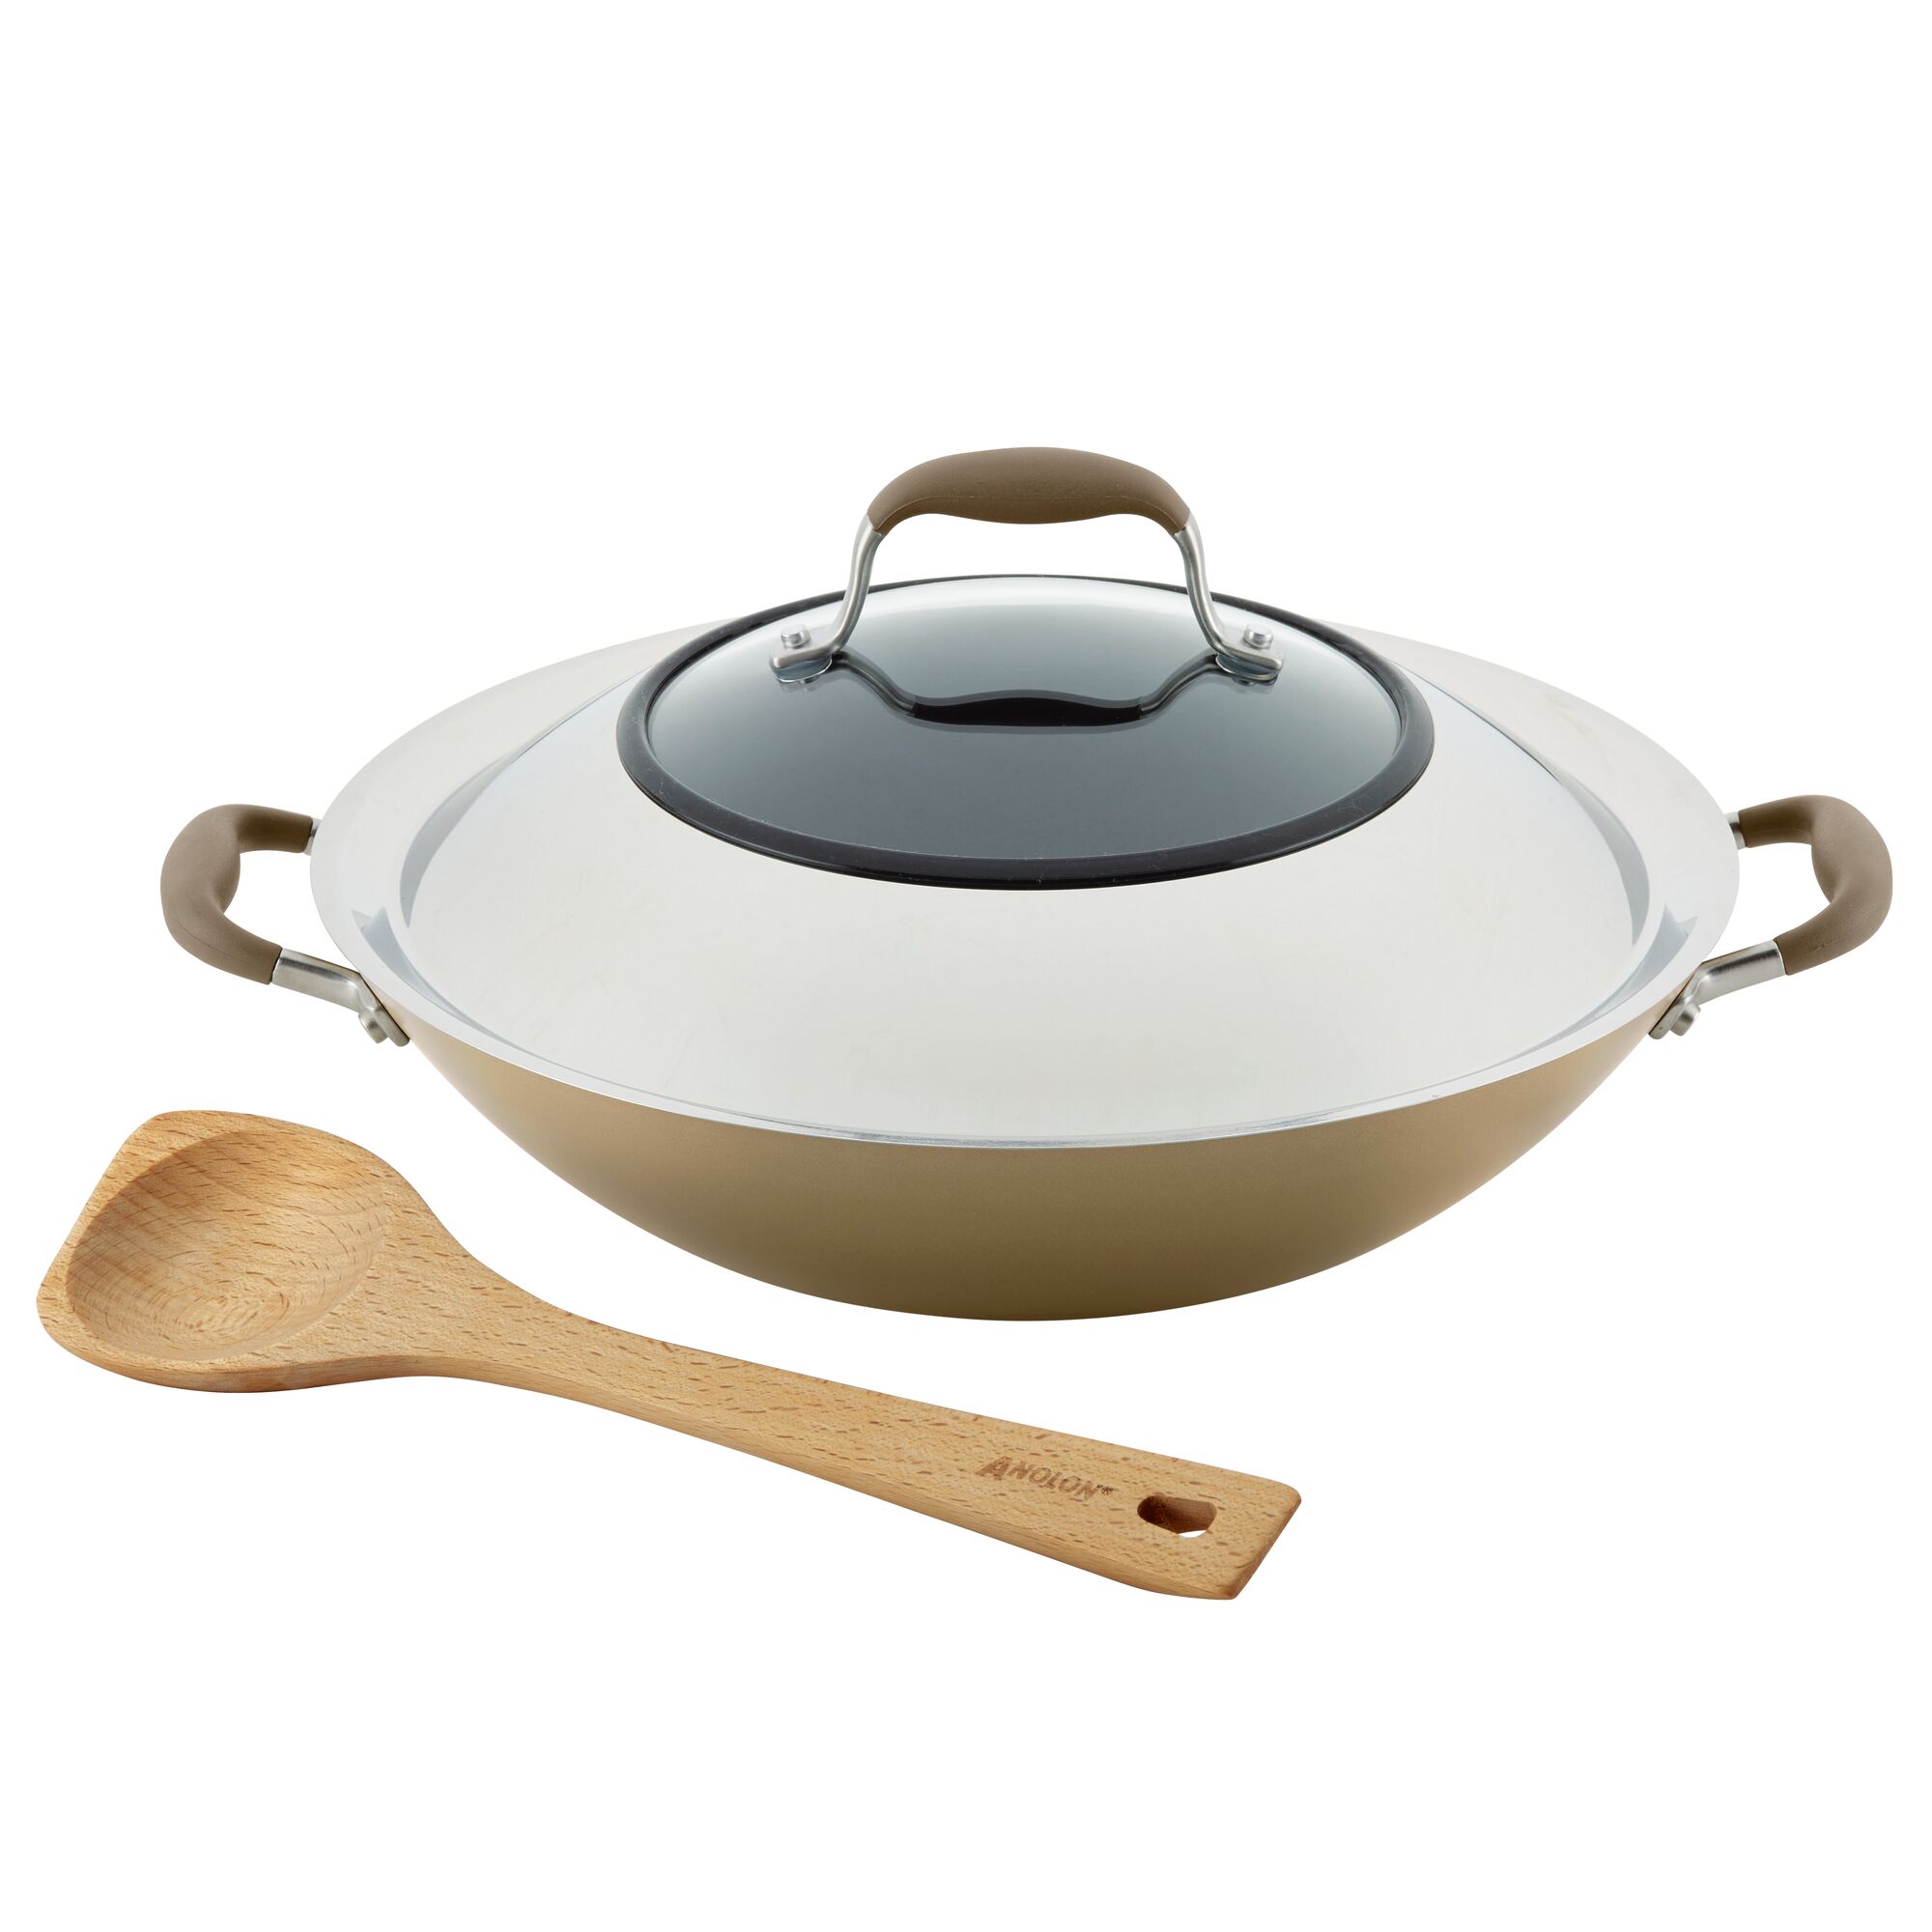 Anolon Advanced Home 14-Inch Wok with Side Handles